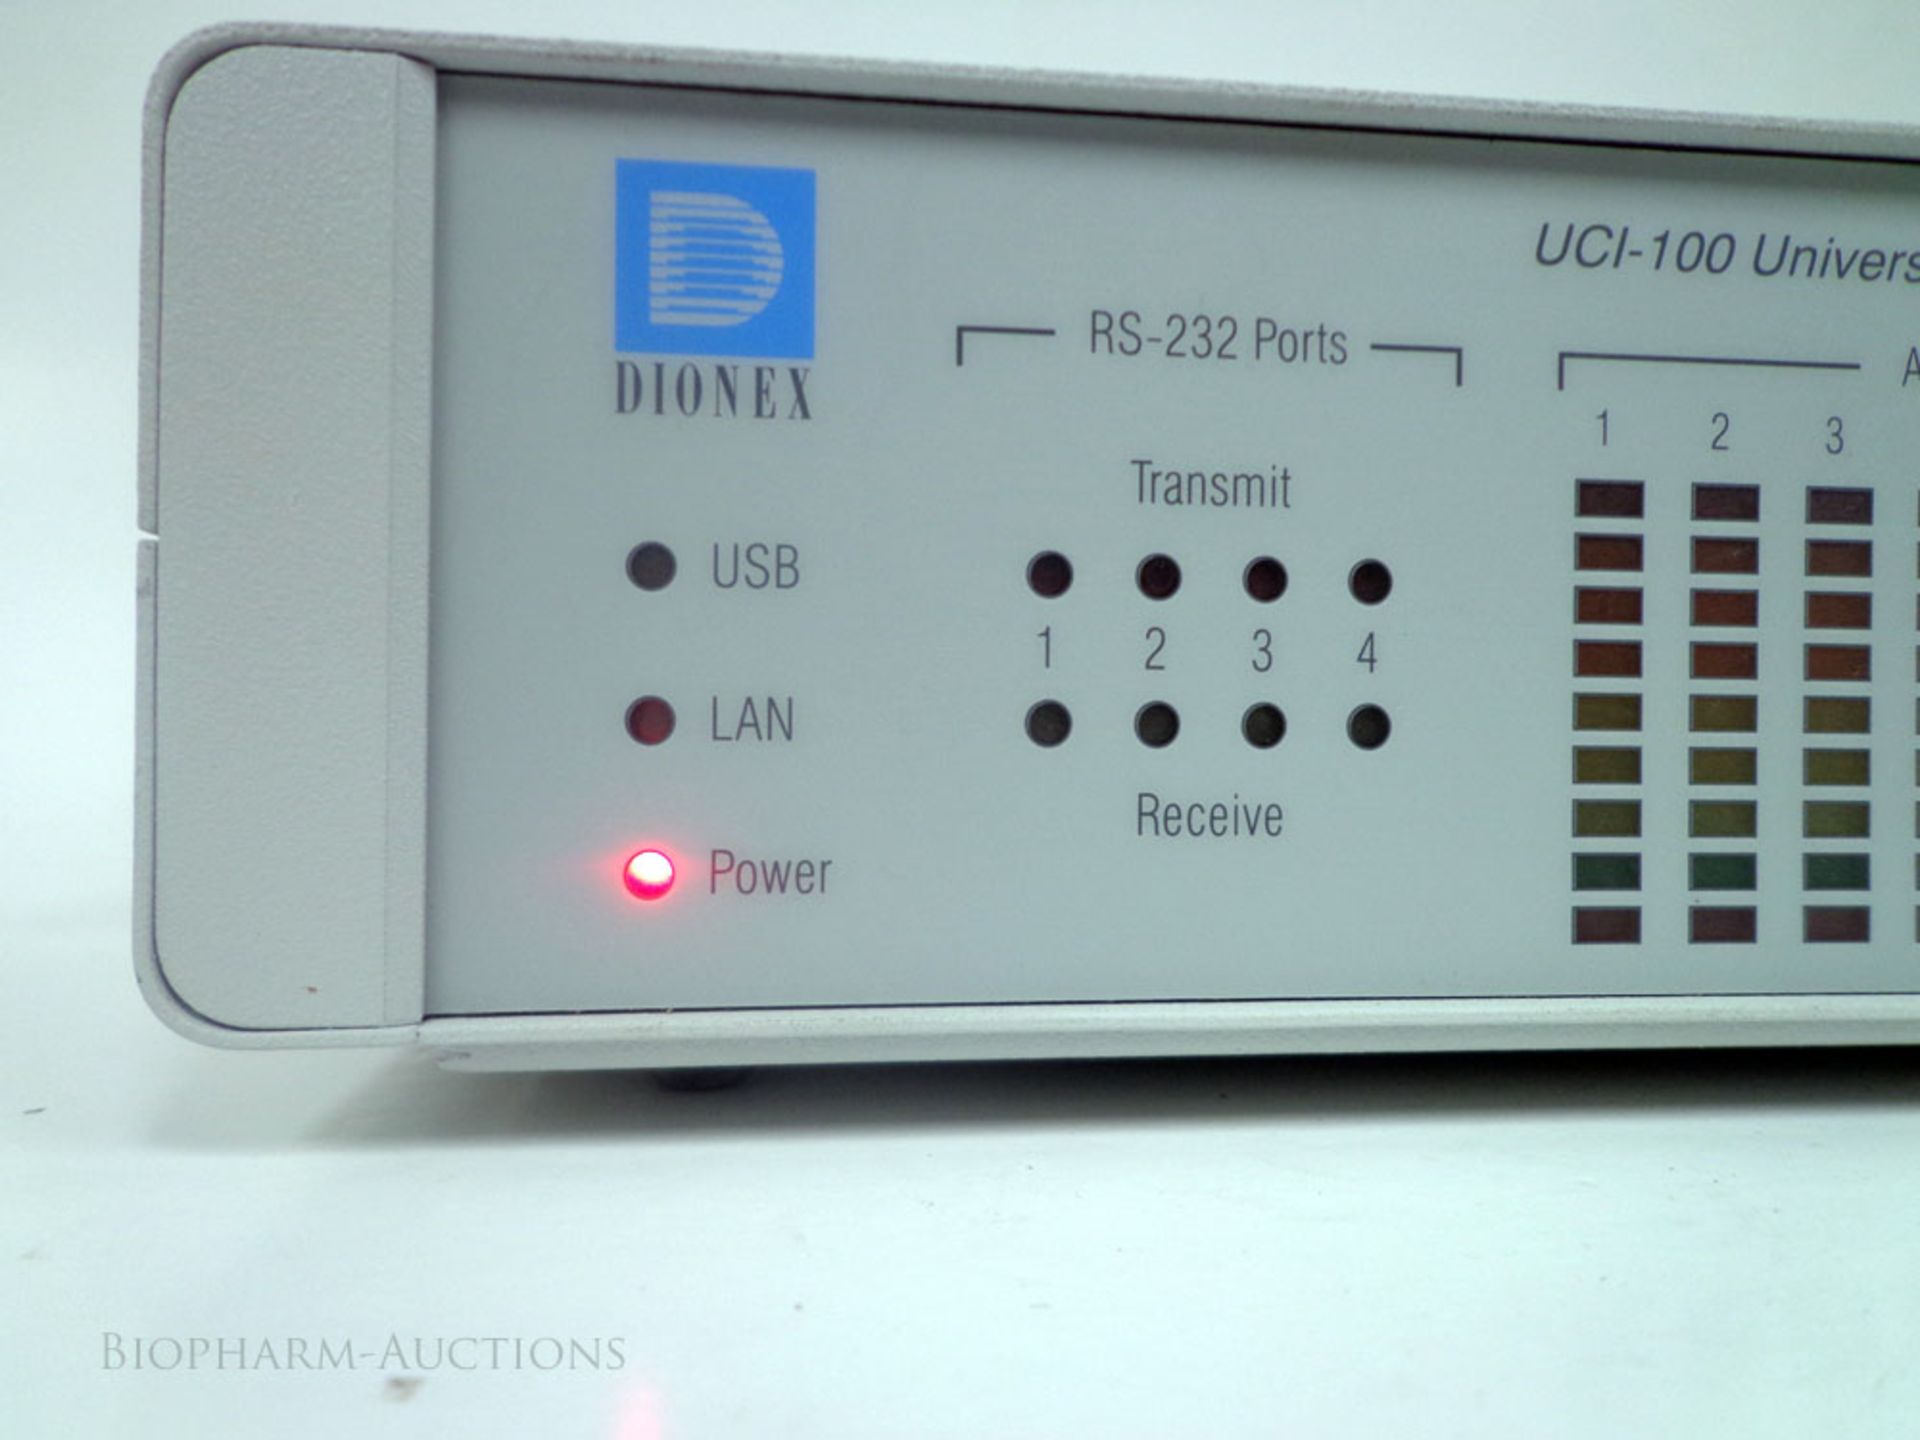 DIONEX Universal Chromatography Interface UCI-100, S/N 2900708. P/N 5911.0010 - Image 6 of 6